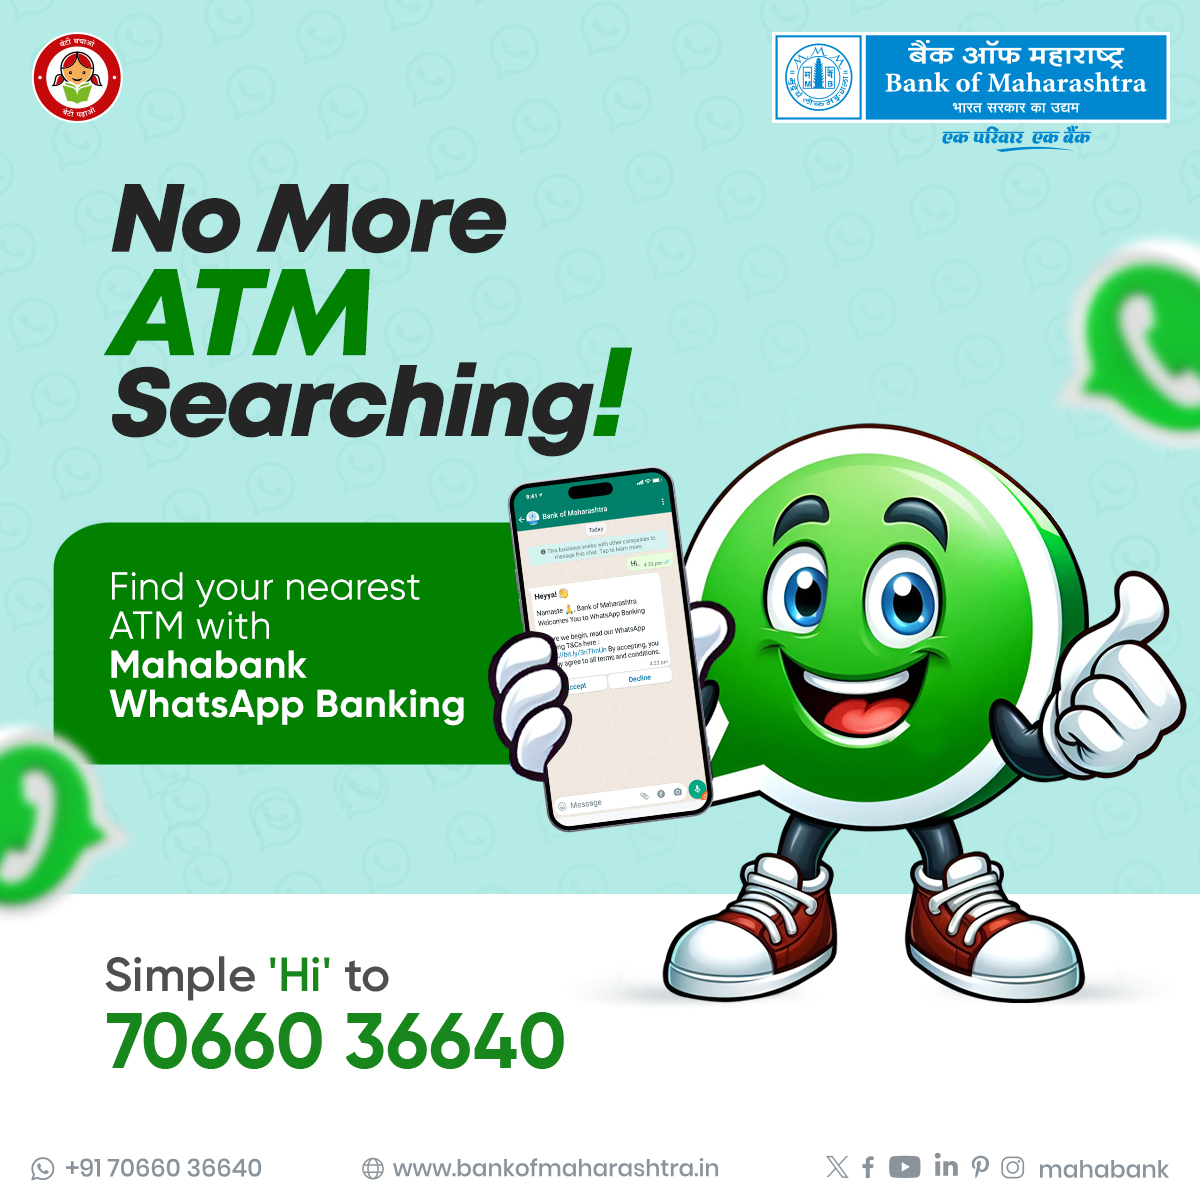 Want to locate a Mahabank ATM? Get it in a click with #Mahabank #WhatsAppBanking! Just send a 'Hi' to 7066036640 with your registered mobile number and access a wide range of banking services instantly. For more information, click bit.ly/BoMWABanking